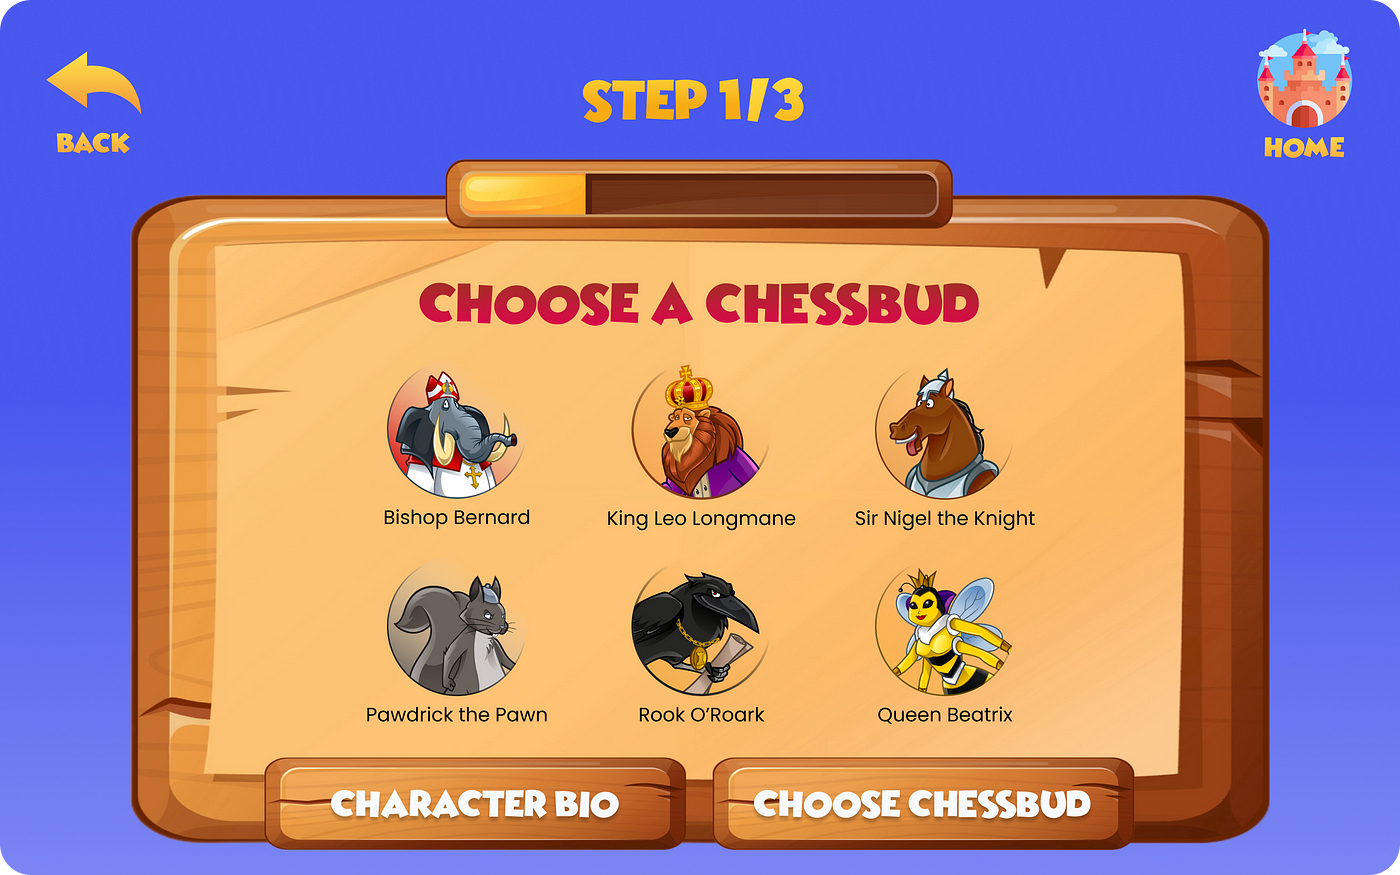 Chessbuds: Helping kids engage with the world's favorite board game, by  Kyle Blacklock